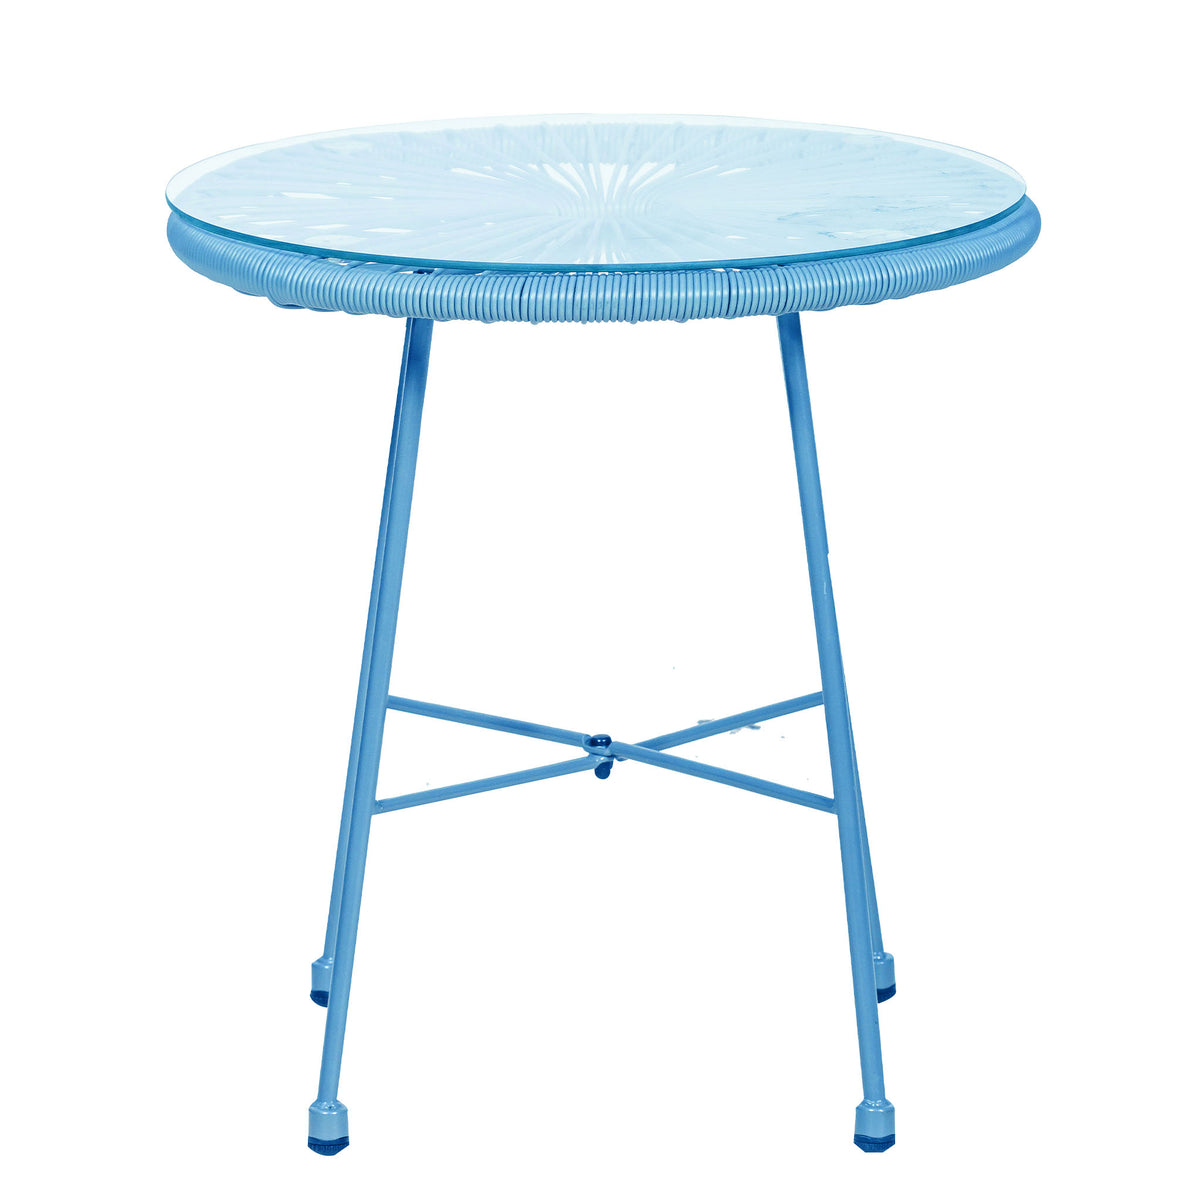 Monaco Blue 2 Seat Garden Egg Chair Bistro Set Table with glass top